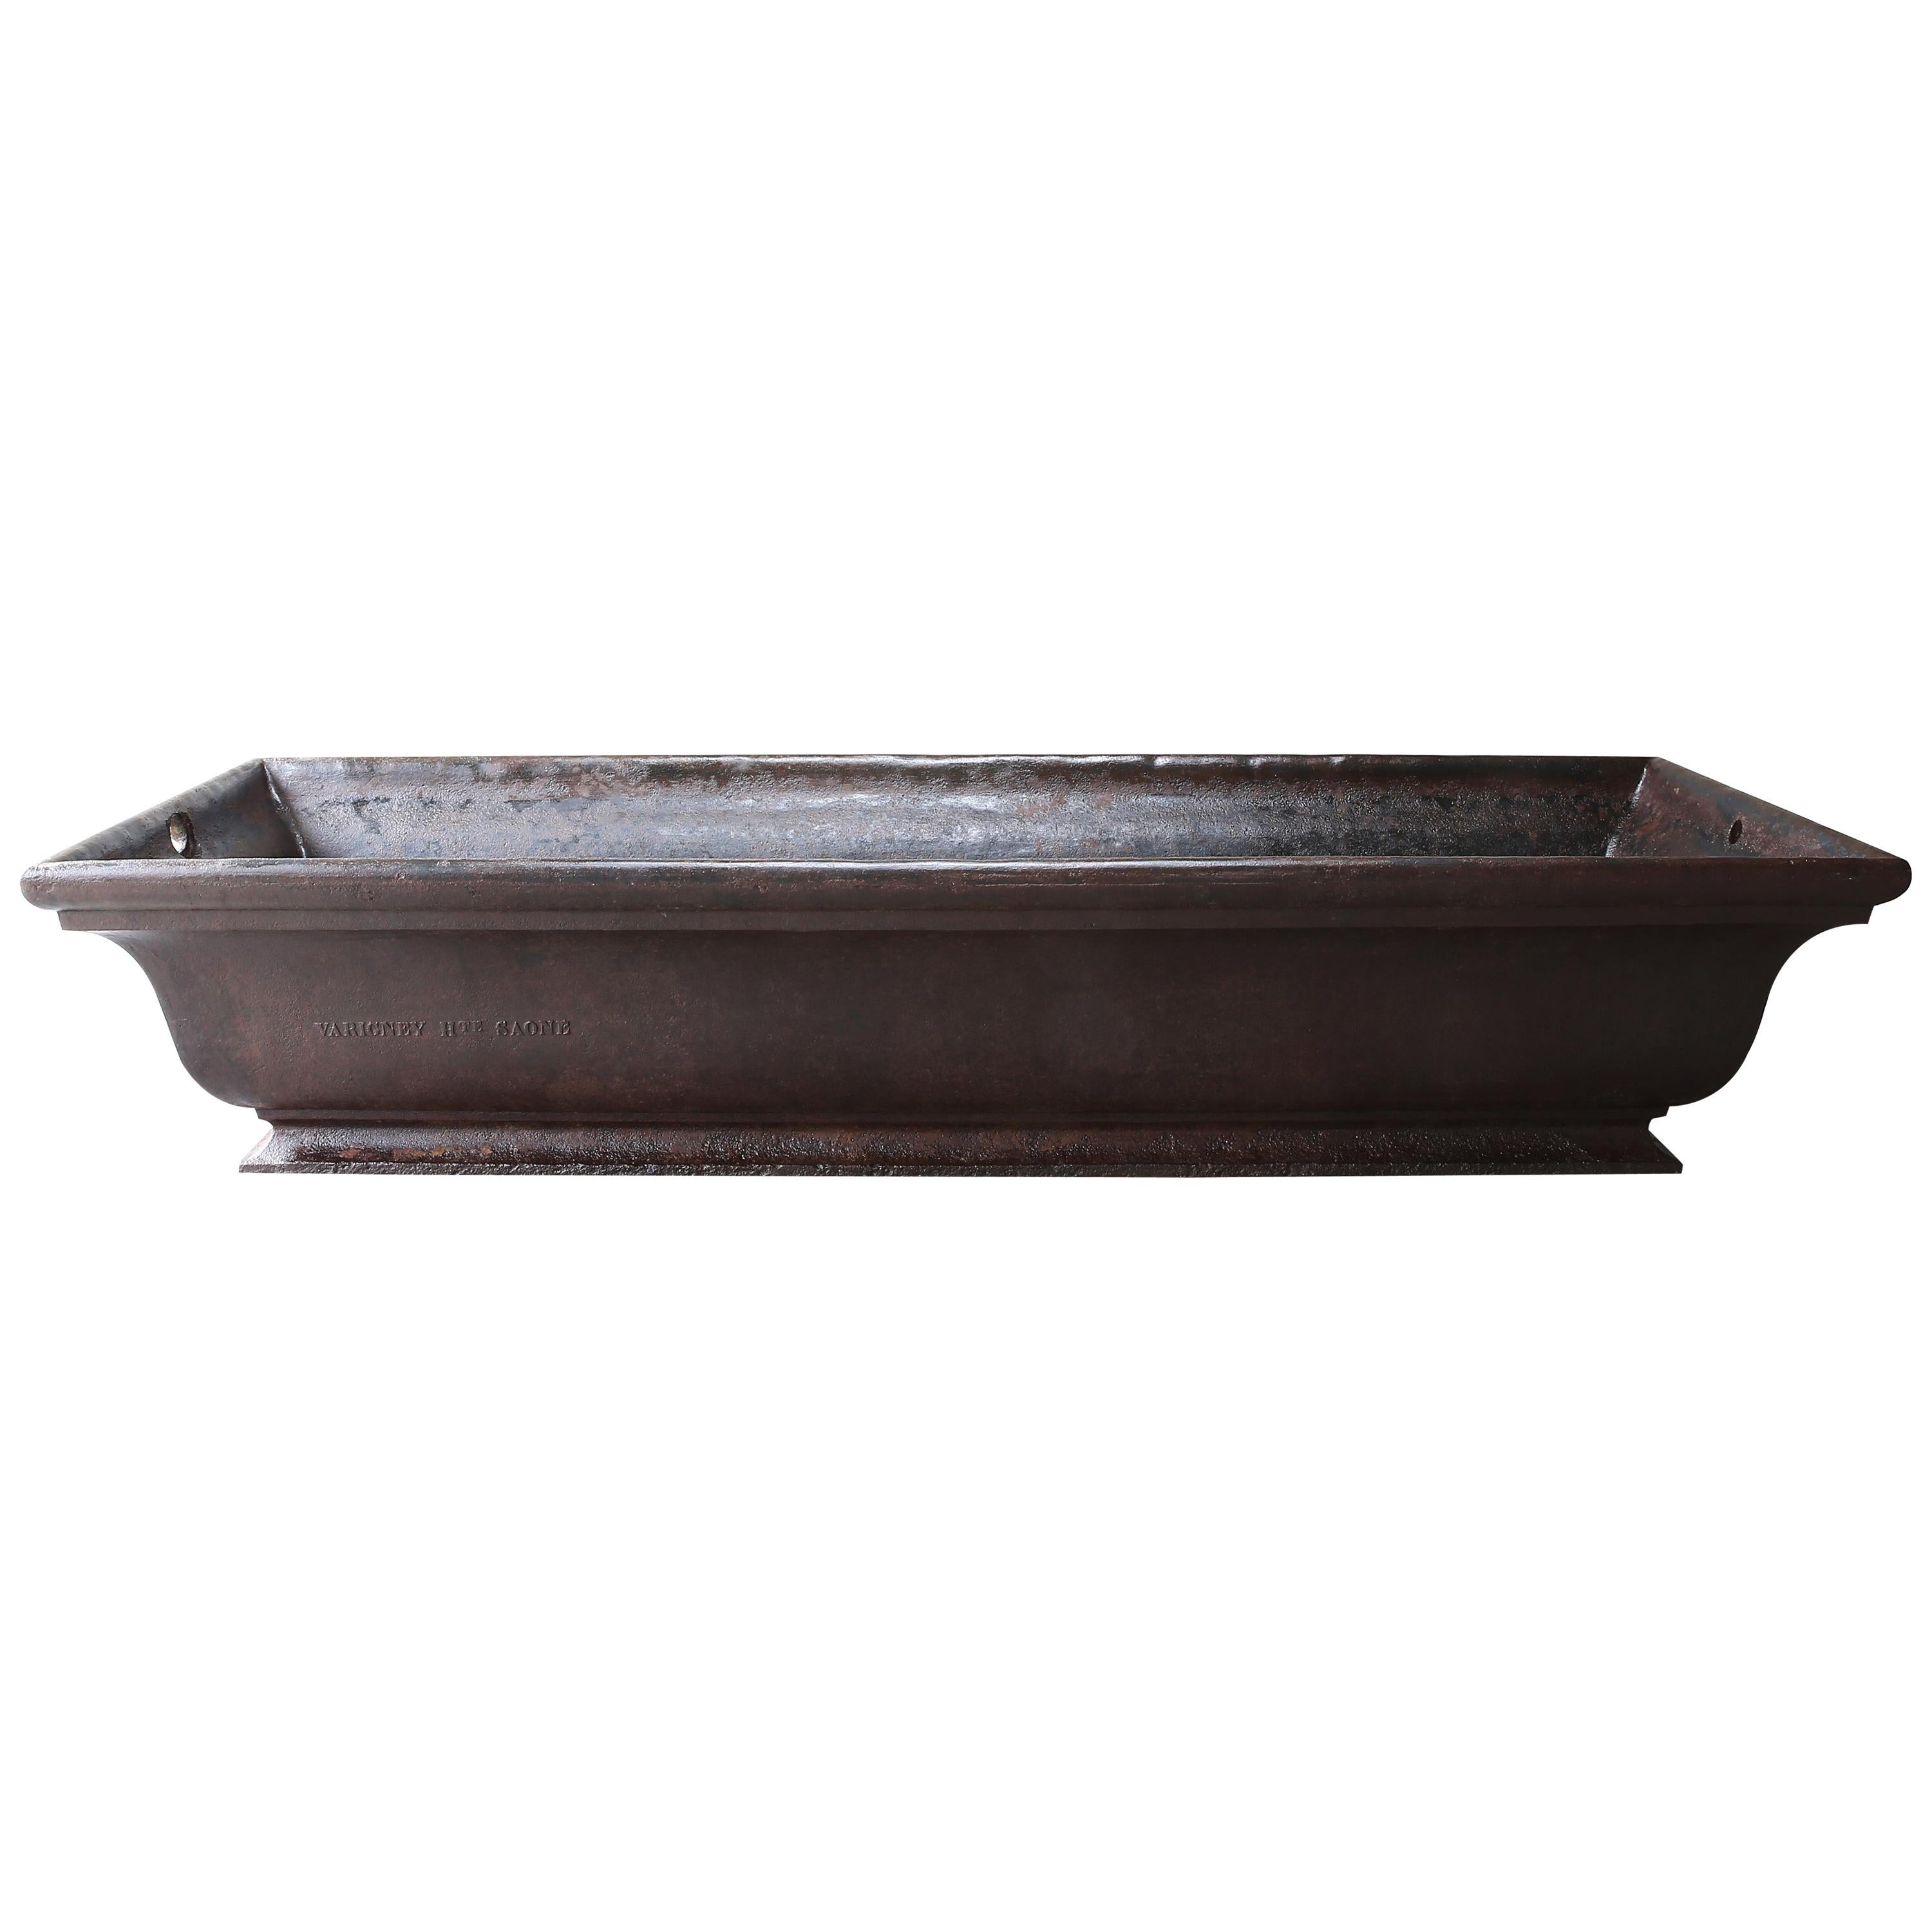 Antique Iron Drinking Trough from 1885 from Varigney Haute Saone, French trough For Sale